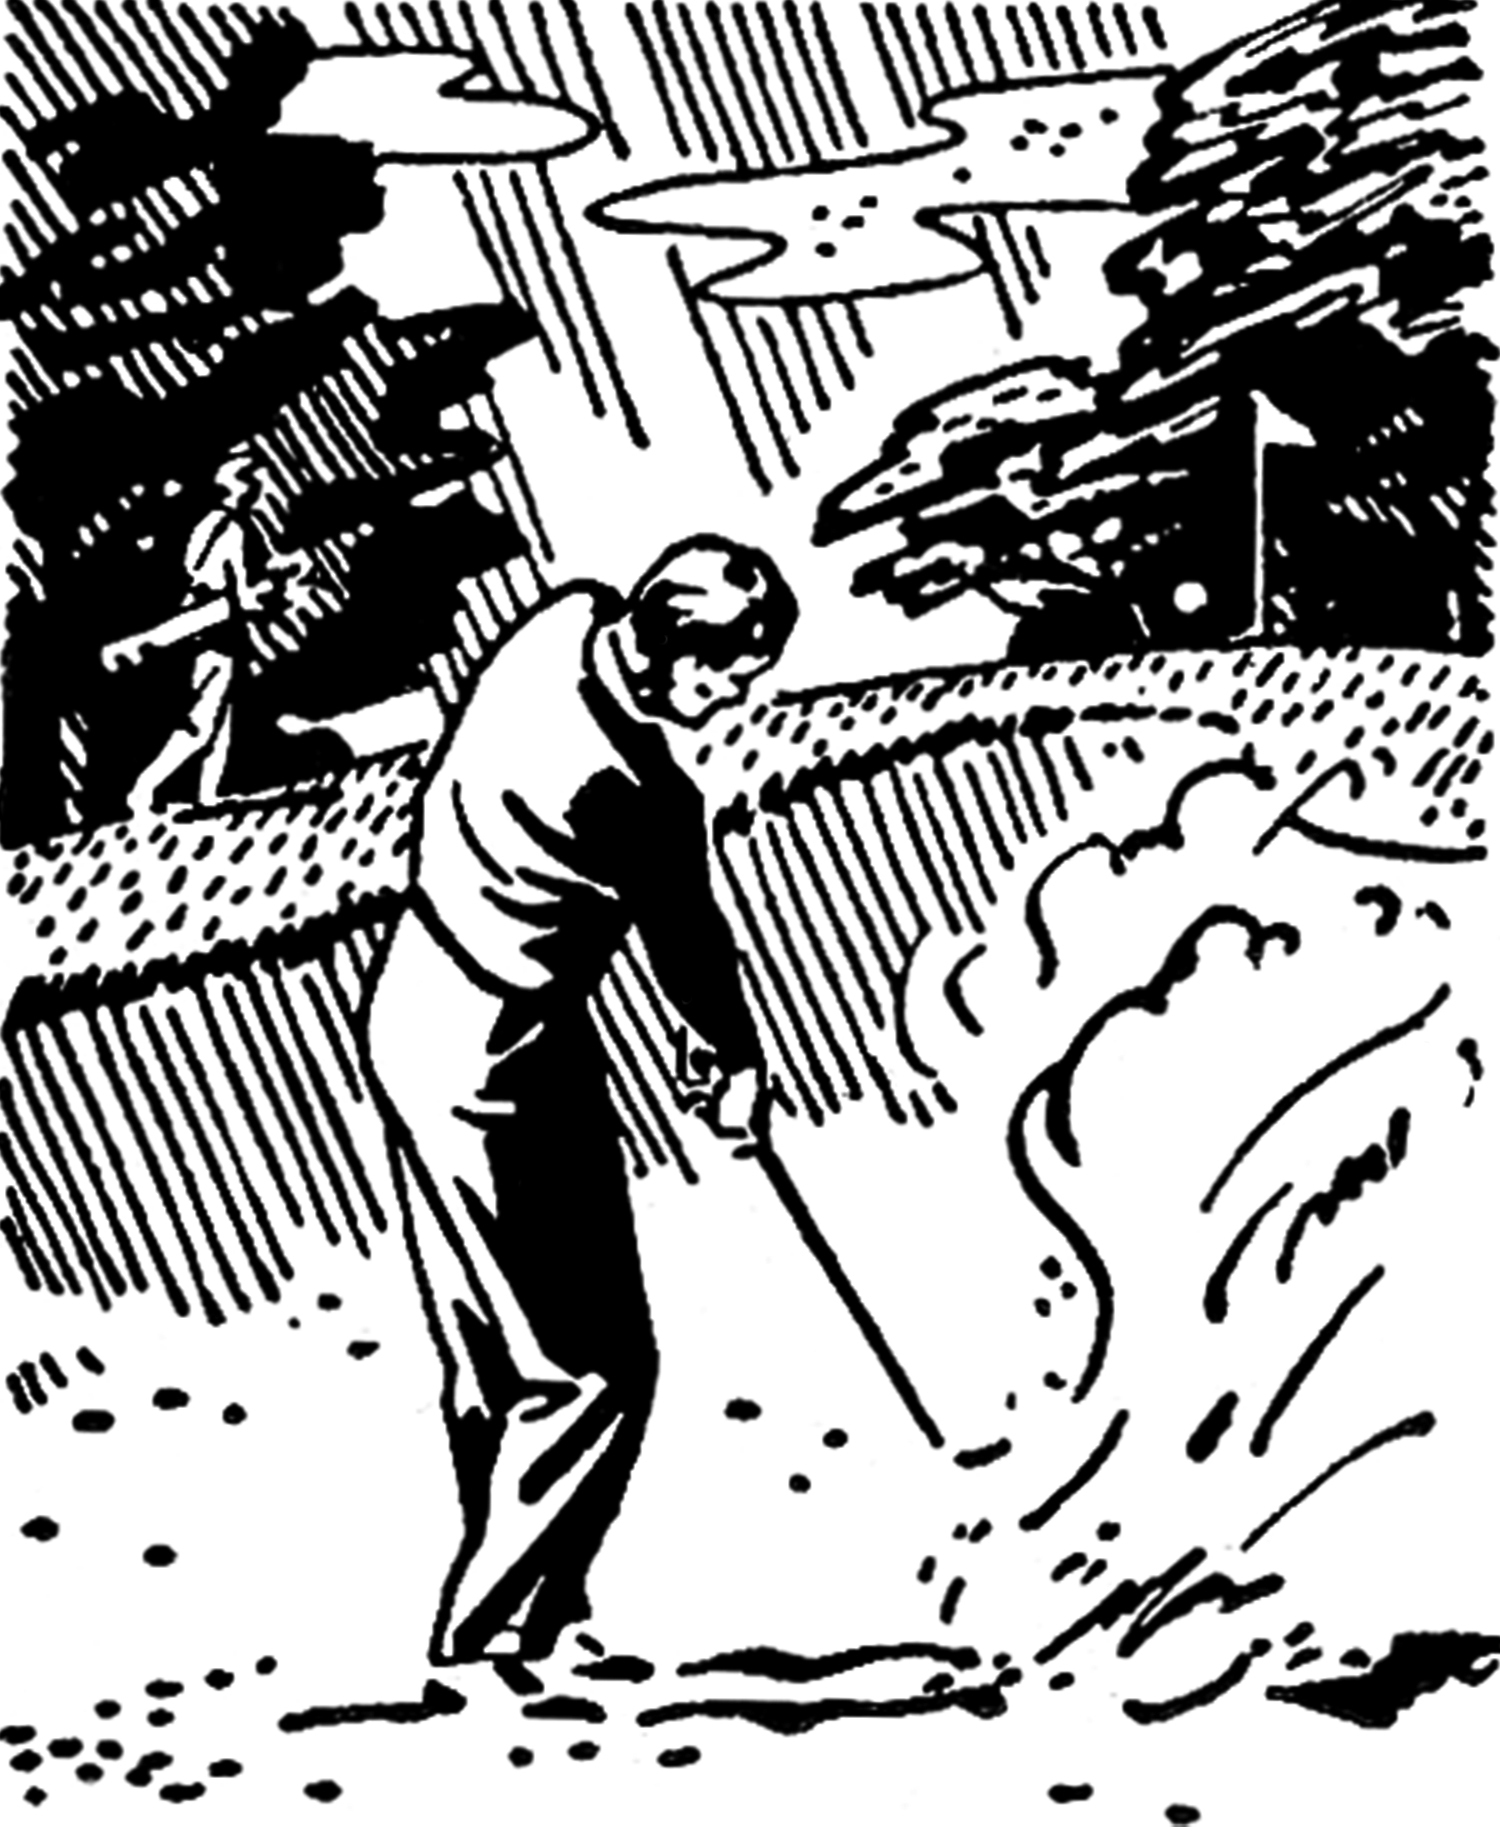 Retro Golf Images   Black And White Clip Art   The Graphics Fairy